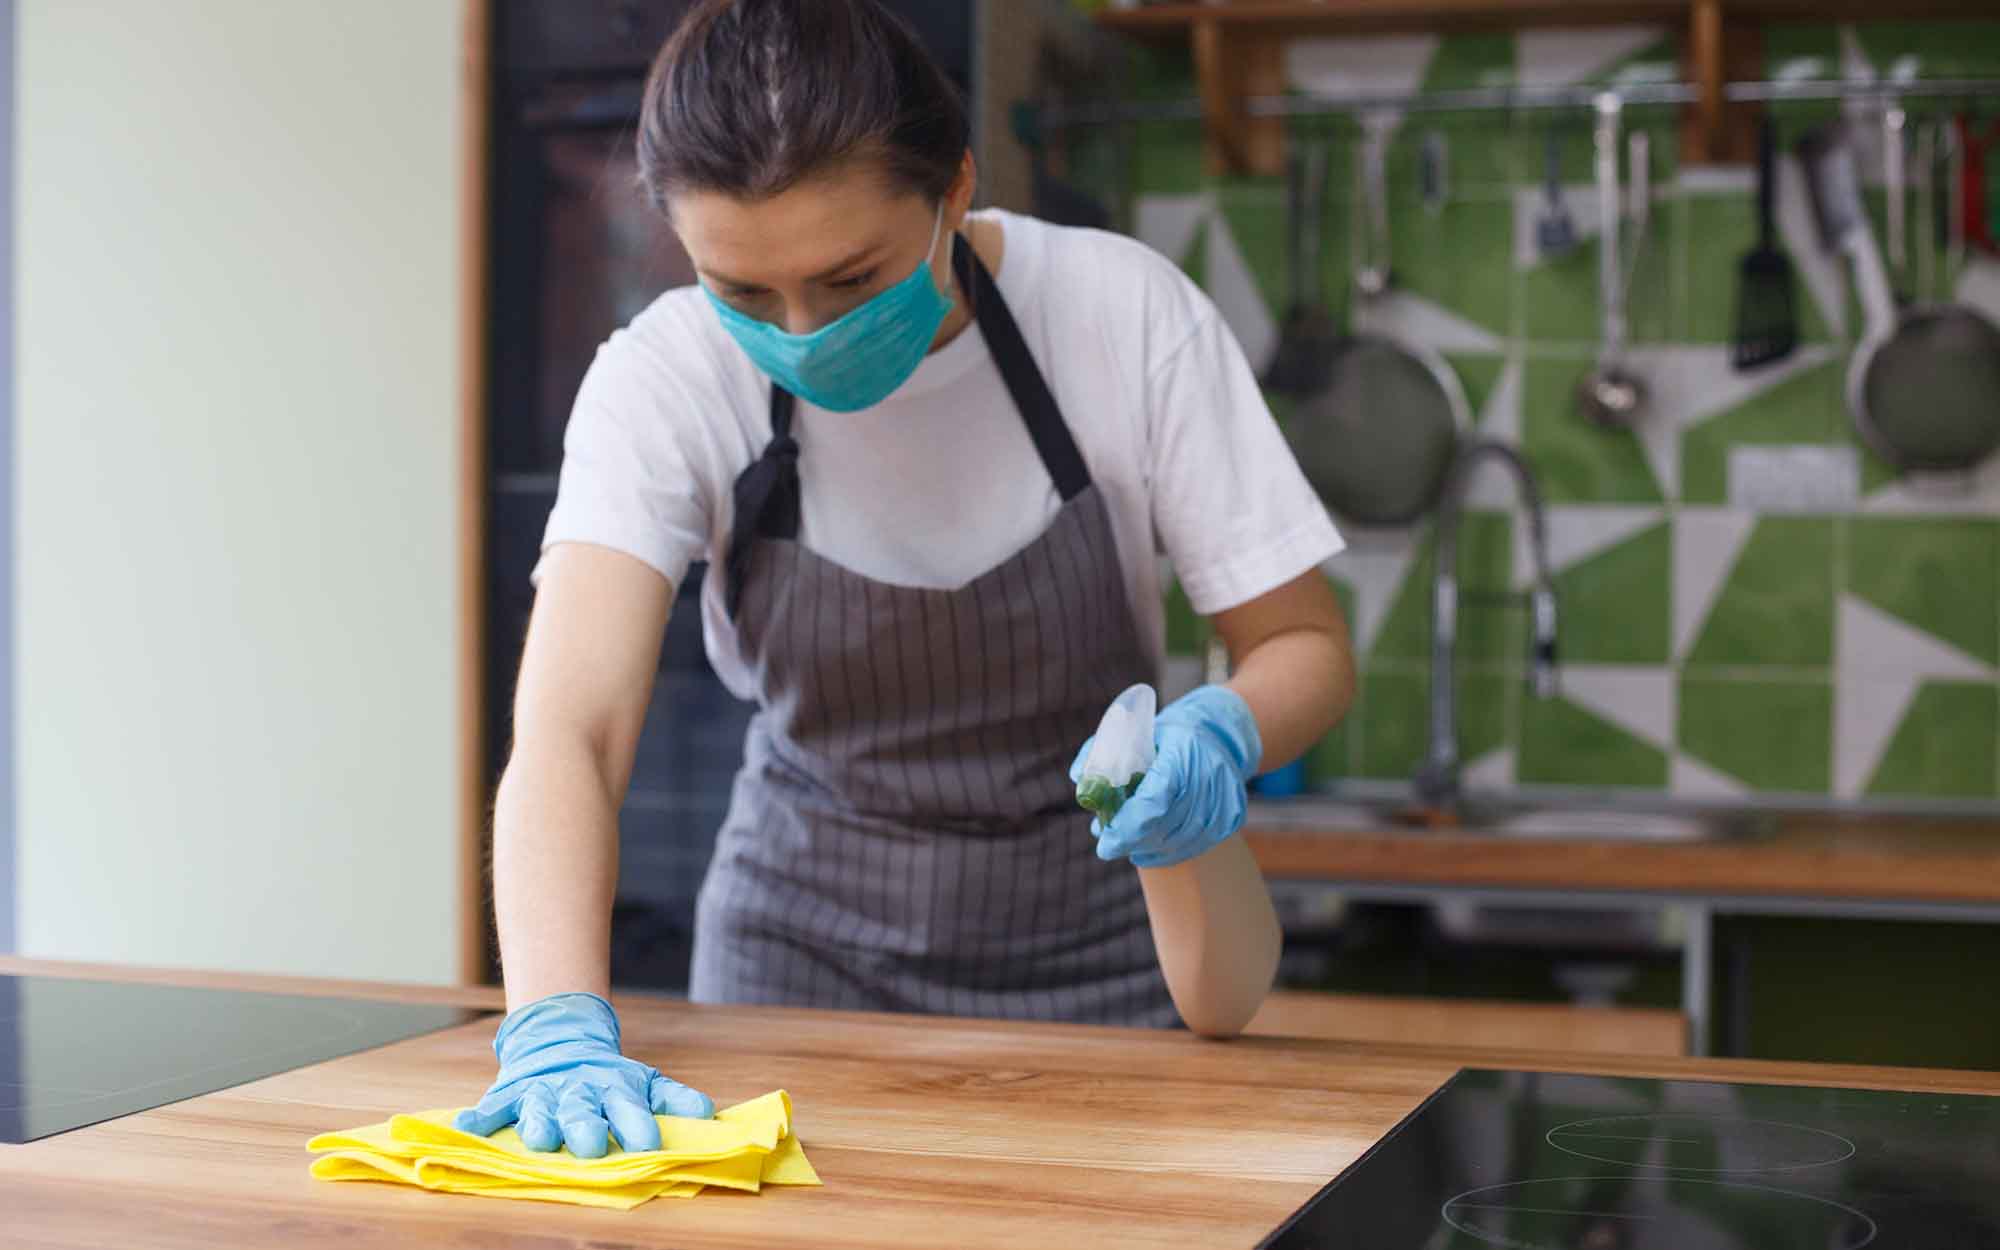 5 Reasons To Hire a House Cleaner